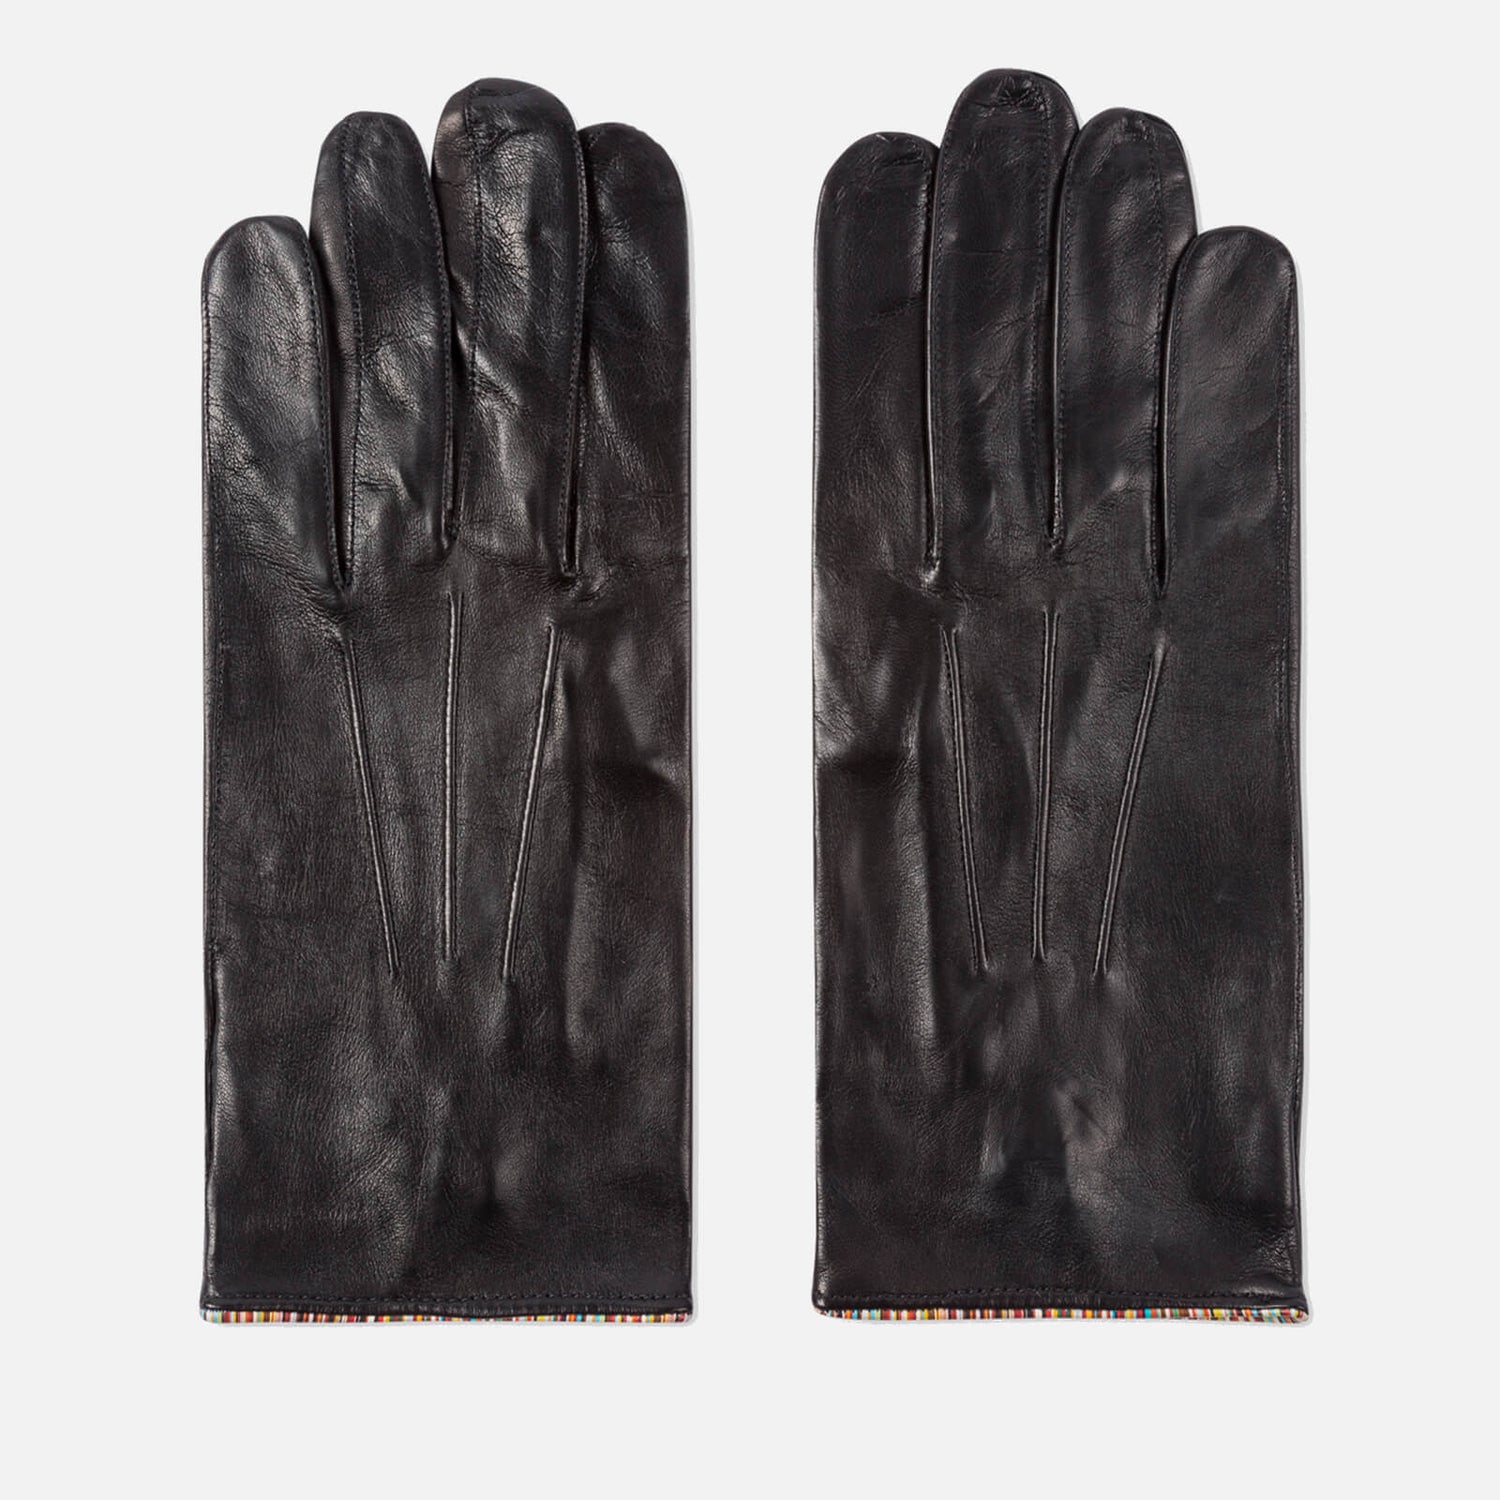 Paul Smith Leather Gloves - S